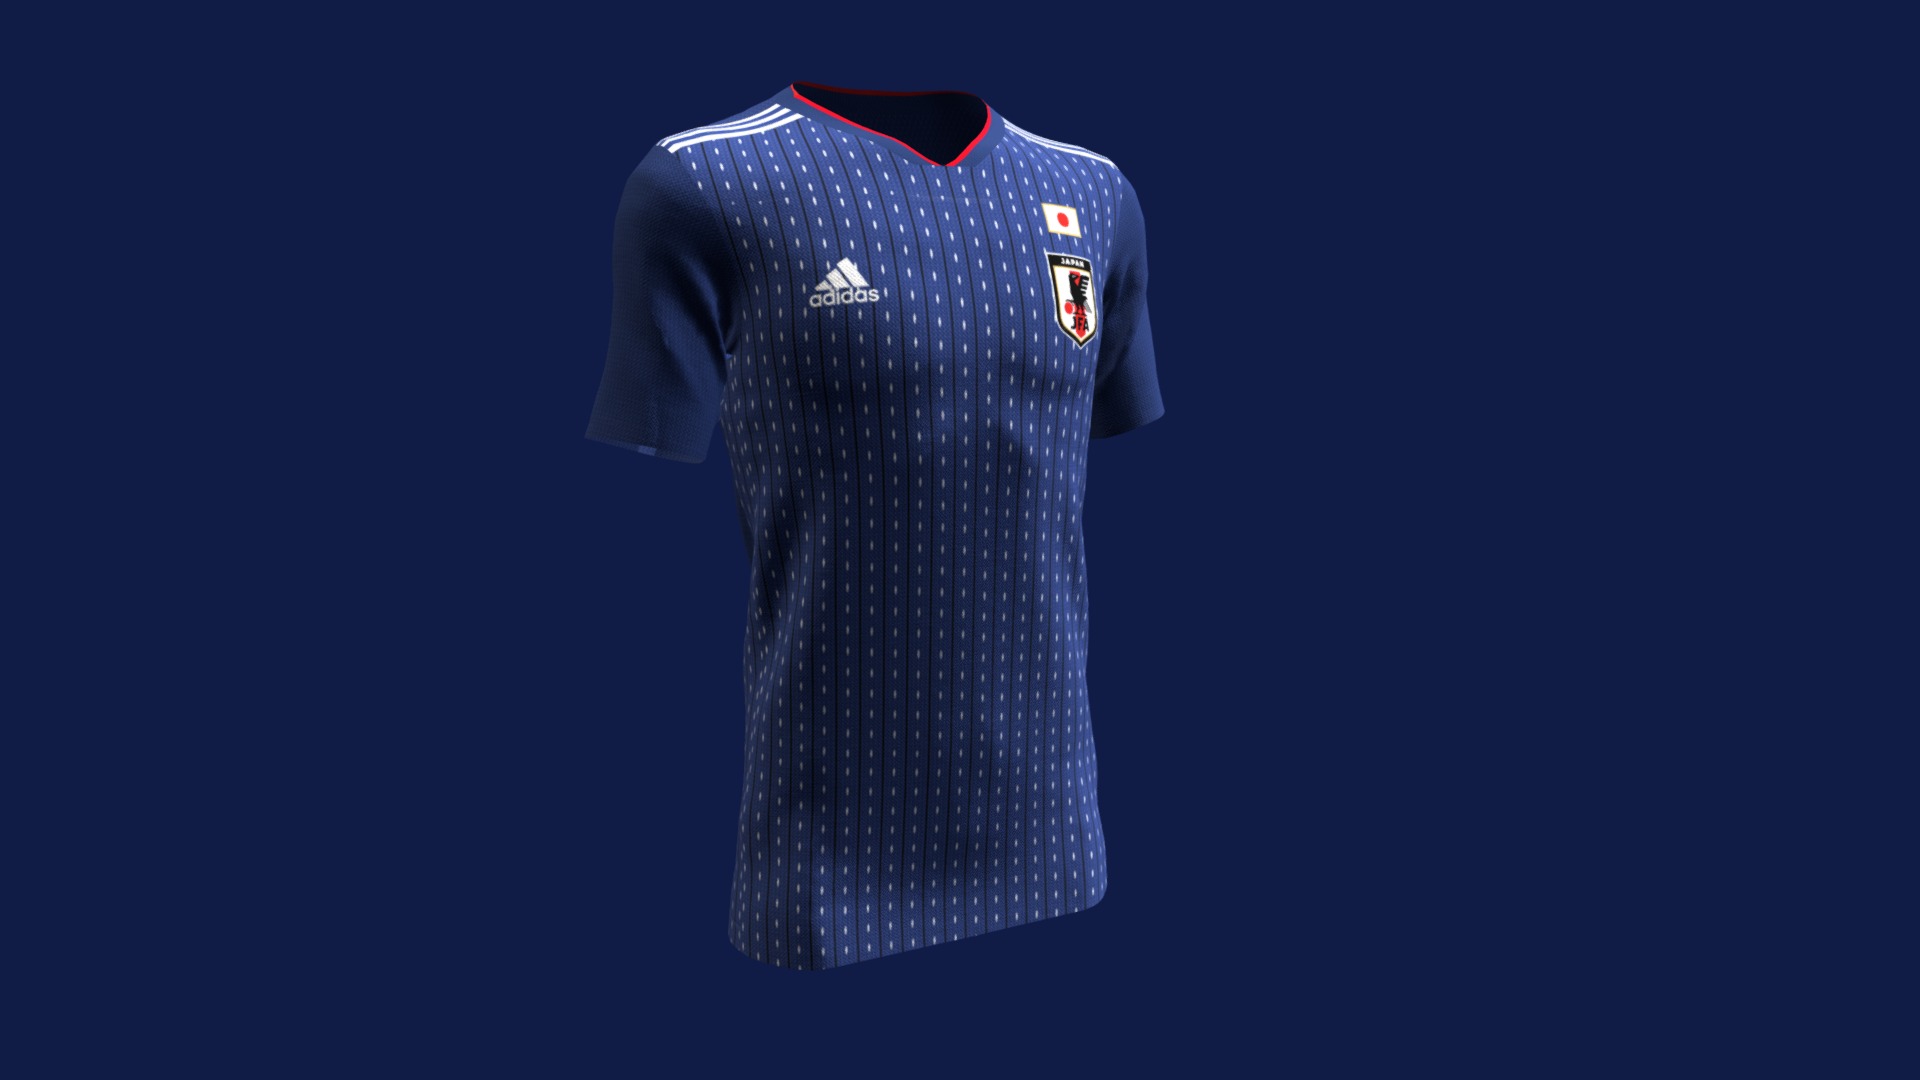 3D model Japan 2018 – Kagawa - This is a 3D model of the Japan 2018 - Kagawa. The 3D model is about a blue and white shirt.